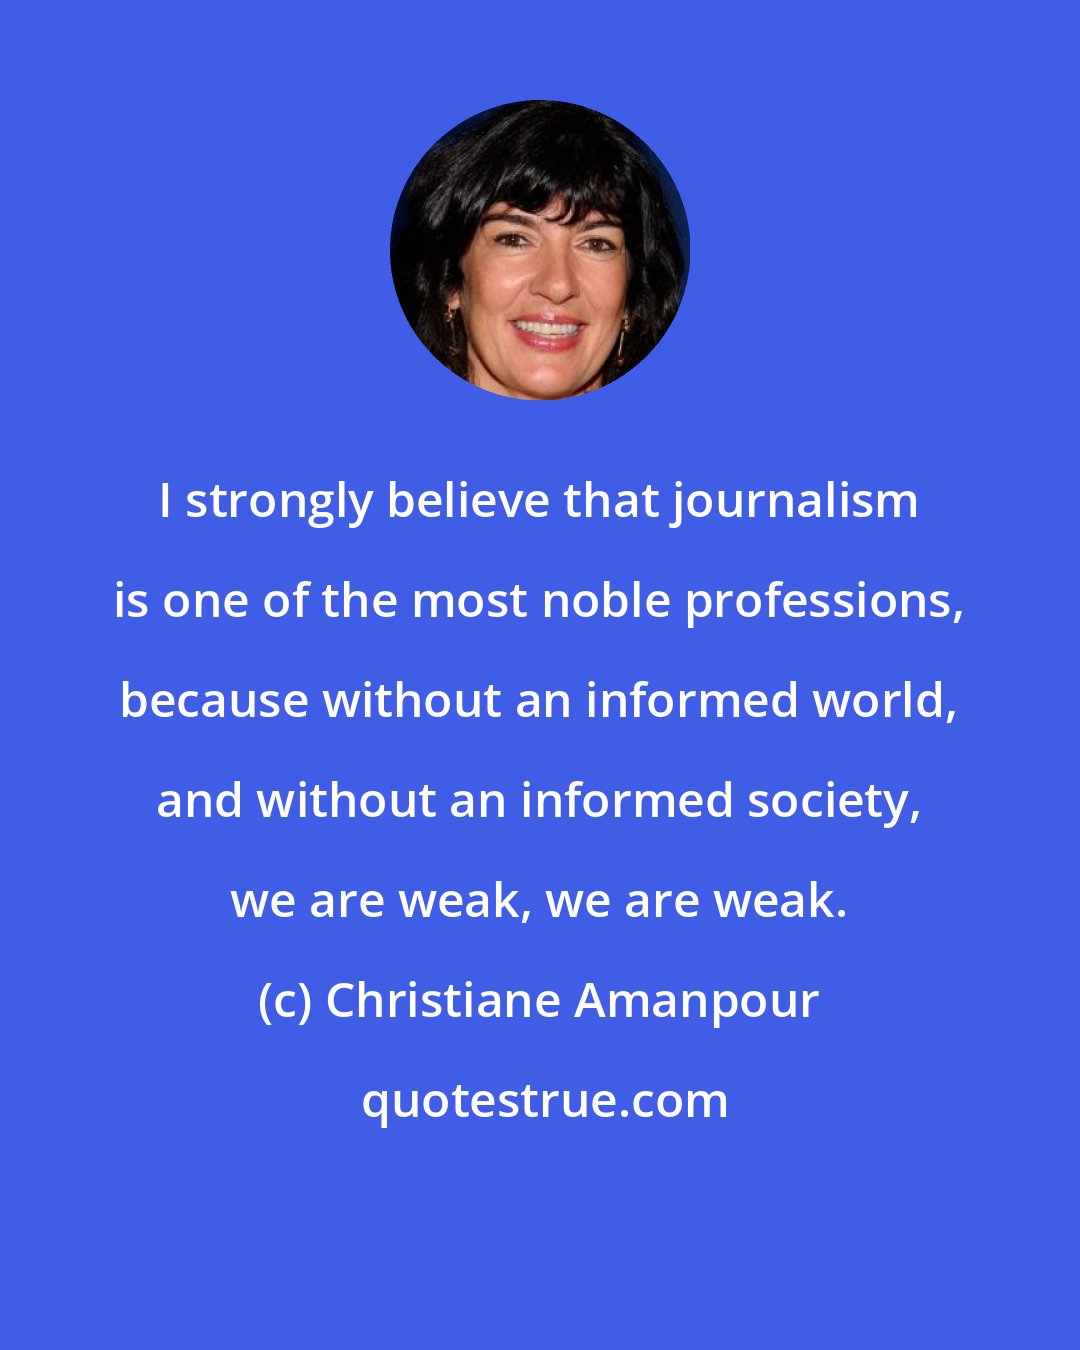 Christiane Amanpour: I strongly believe that journalism is one of the most noble professions, because without an informed world, and without an informed society, we are weak, we are weak.